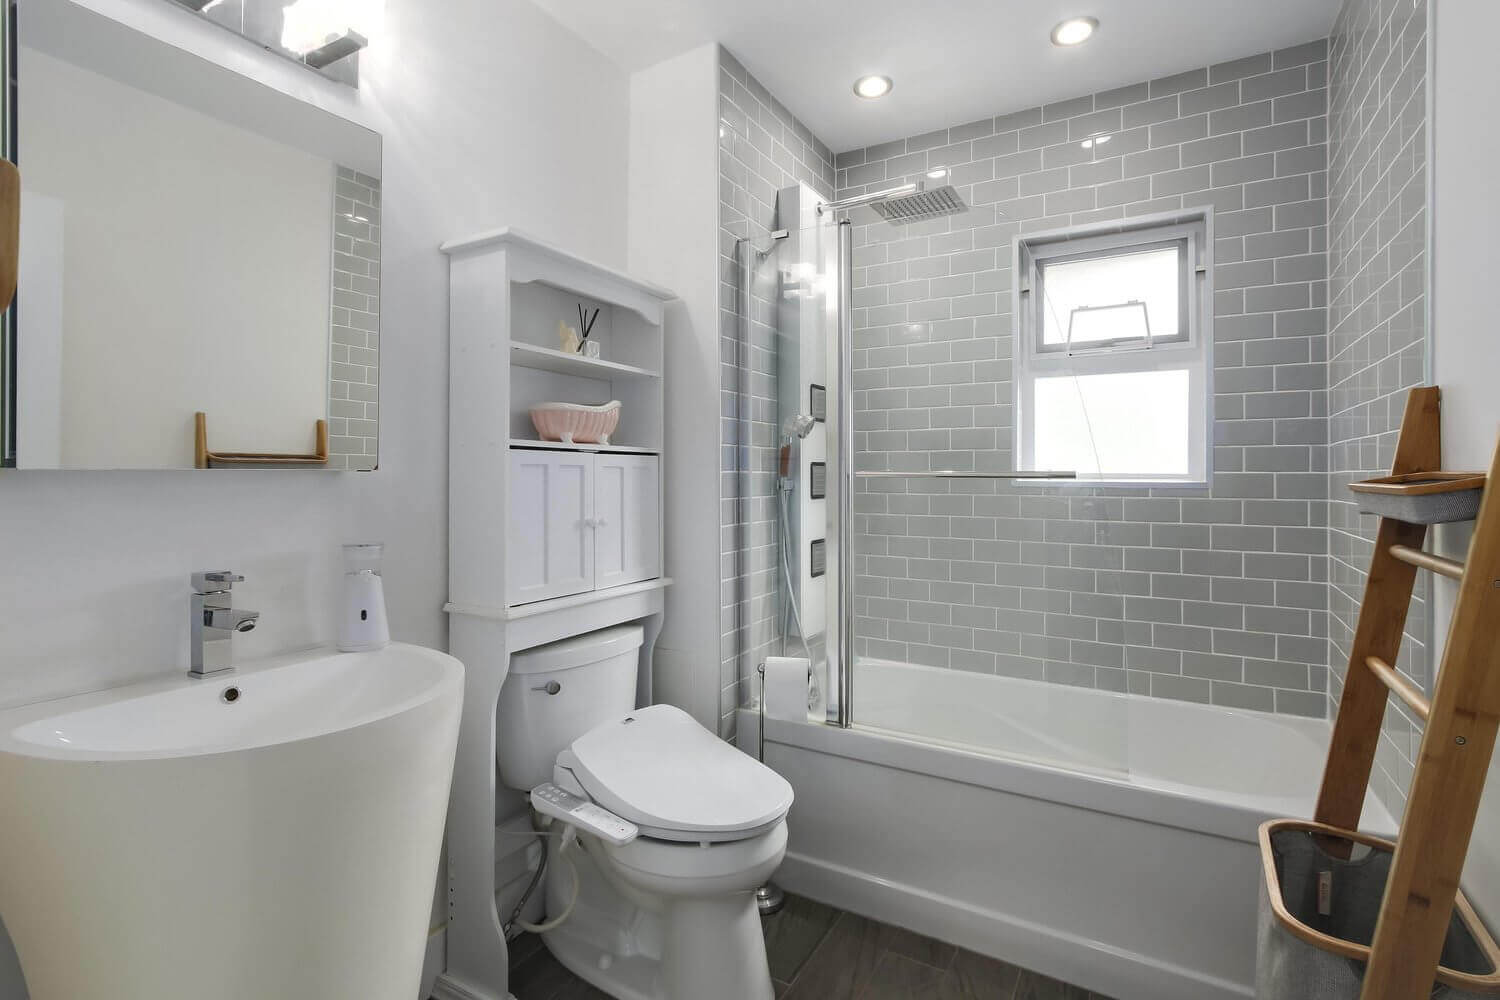 brunette ave coquitlam bathroom selling real estate photos